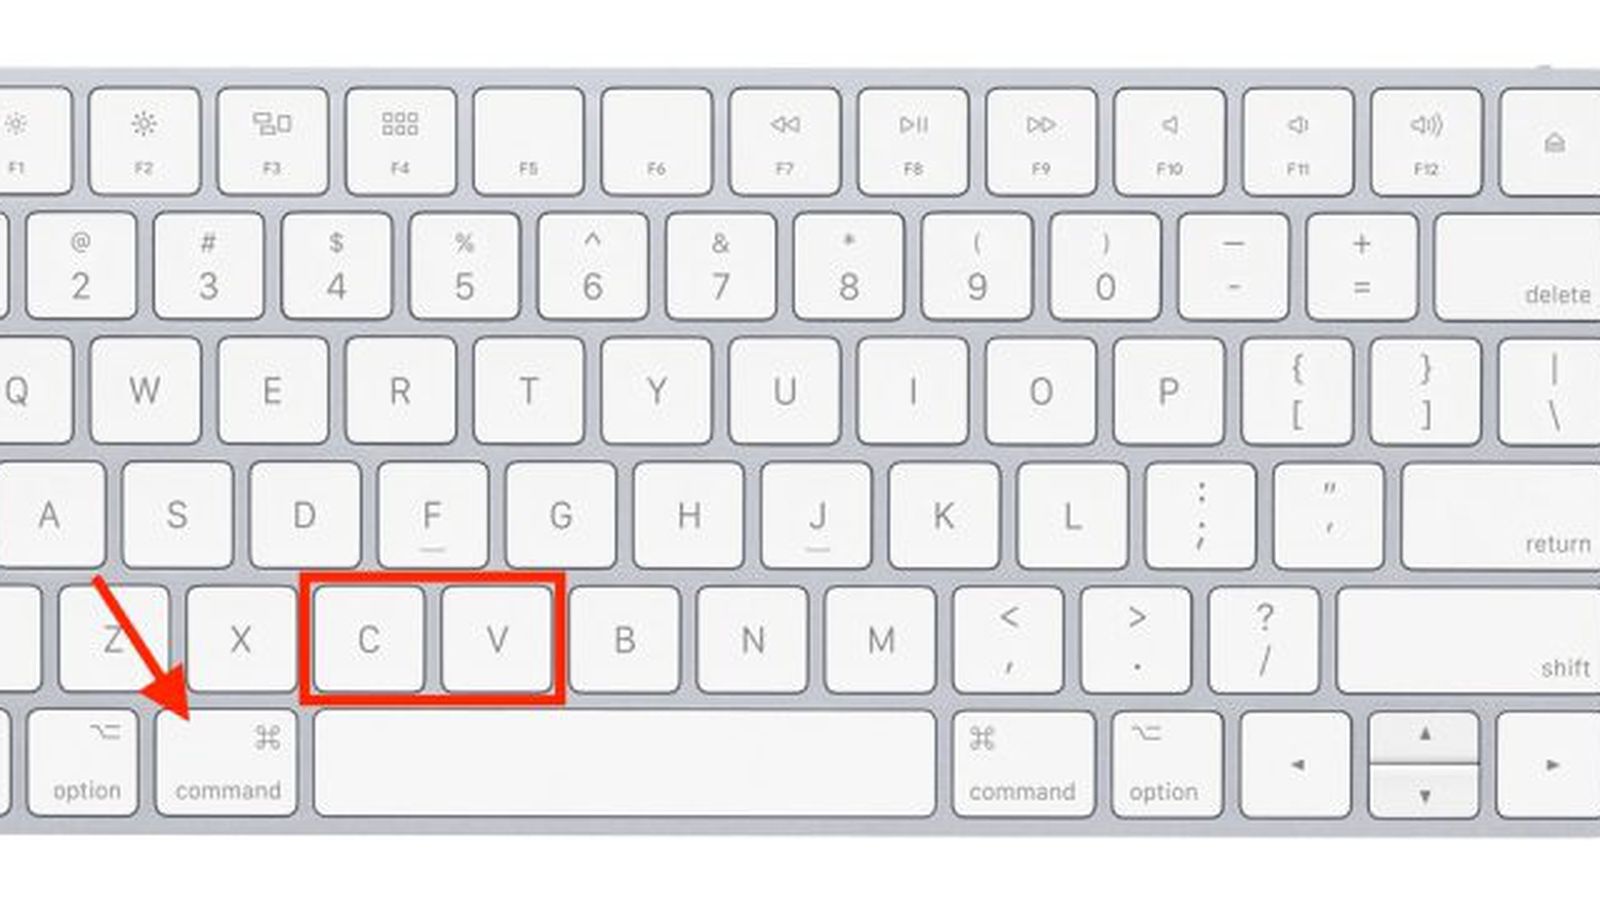 copy and paste shortcuts on a mac